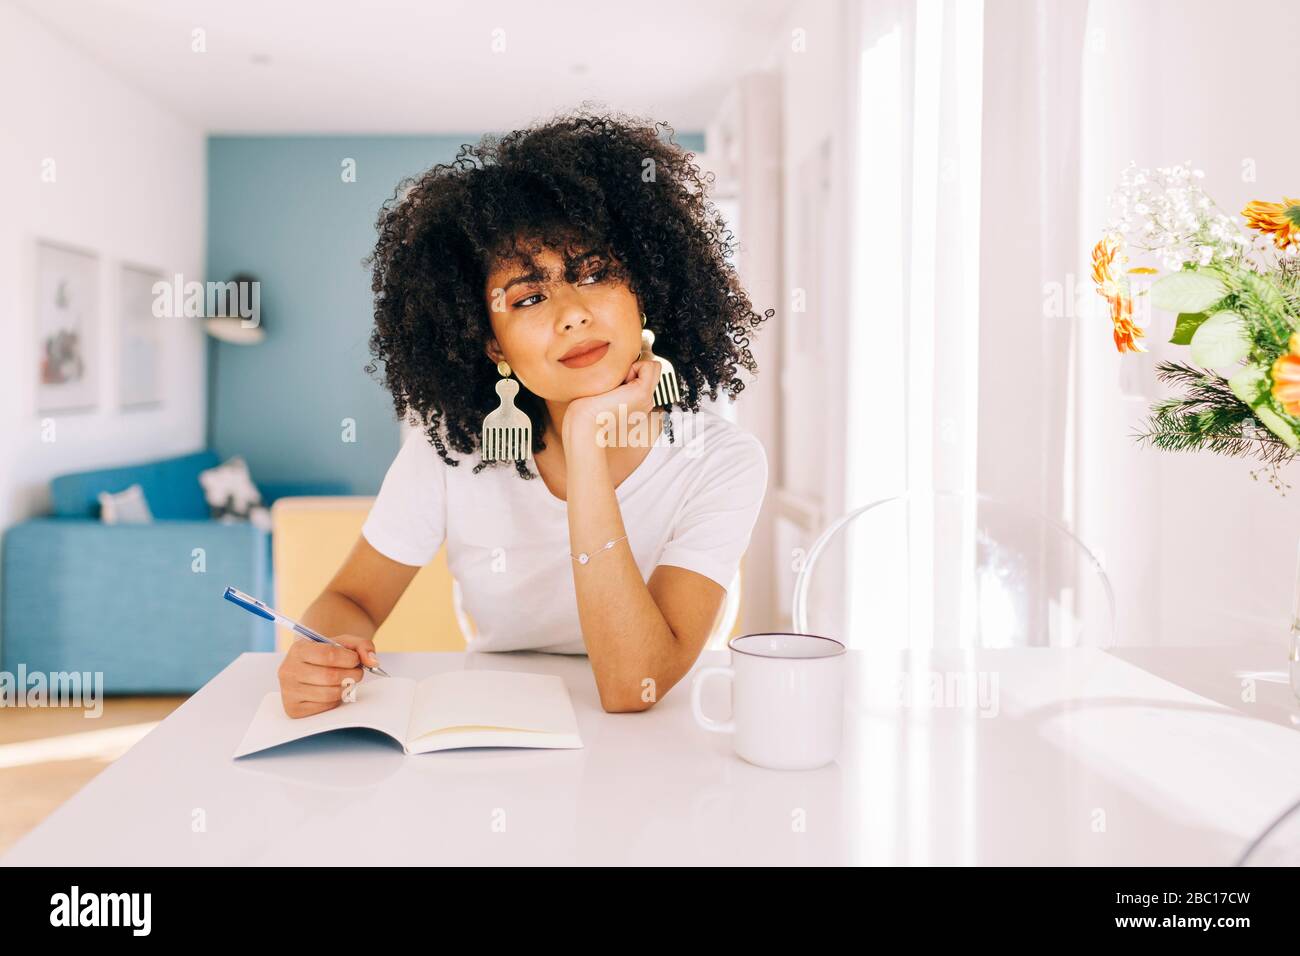 Portrait of young woman with curly hair sitting at a table with a notebook at home Stock Photo